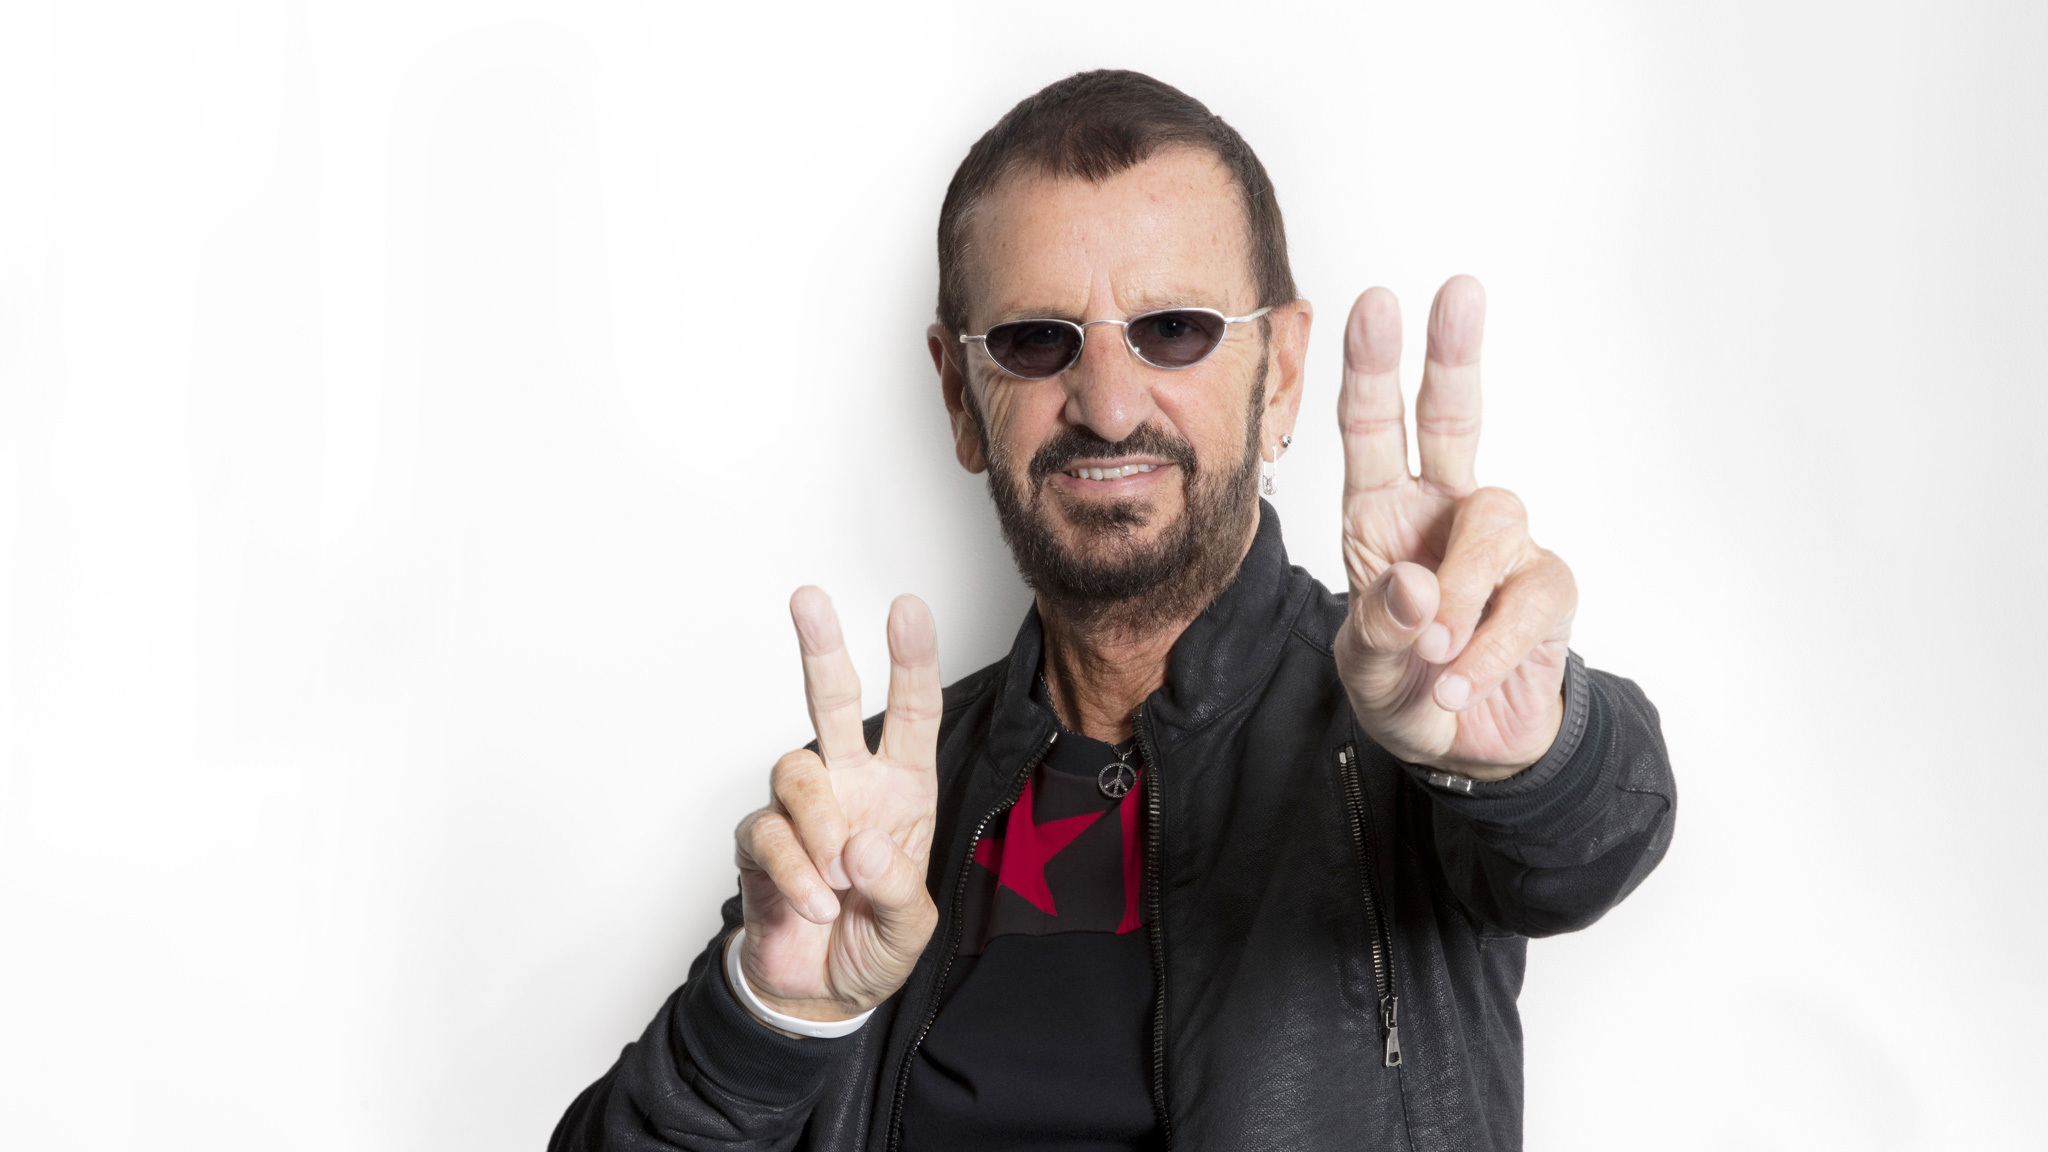 Ringo Starr’s Peace & Love Birthday Things to do in Los Angeles